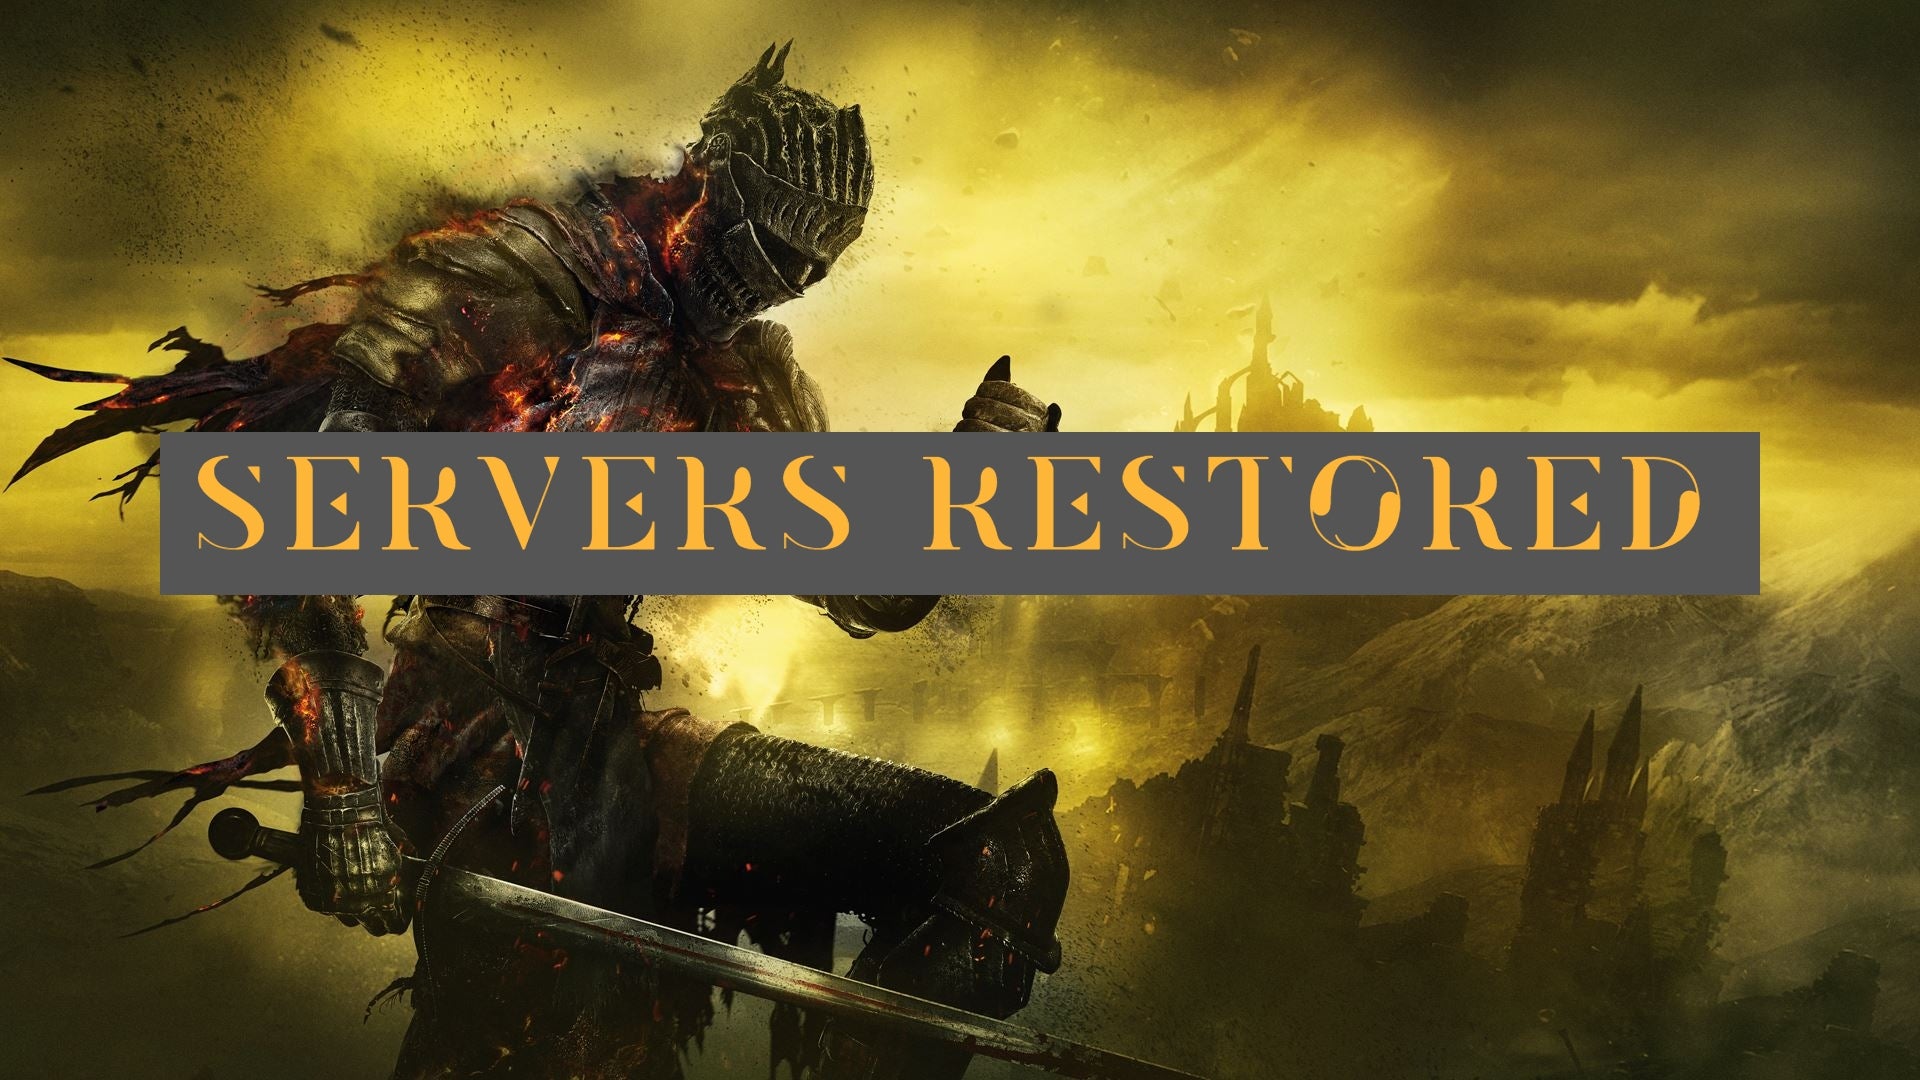 Dark Souls 3's PC servers have been restored seven months after they were disabled due to security risks.